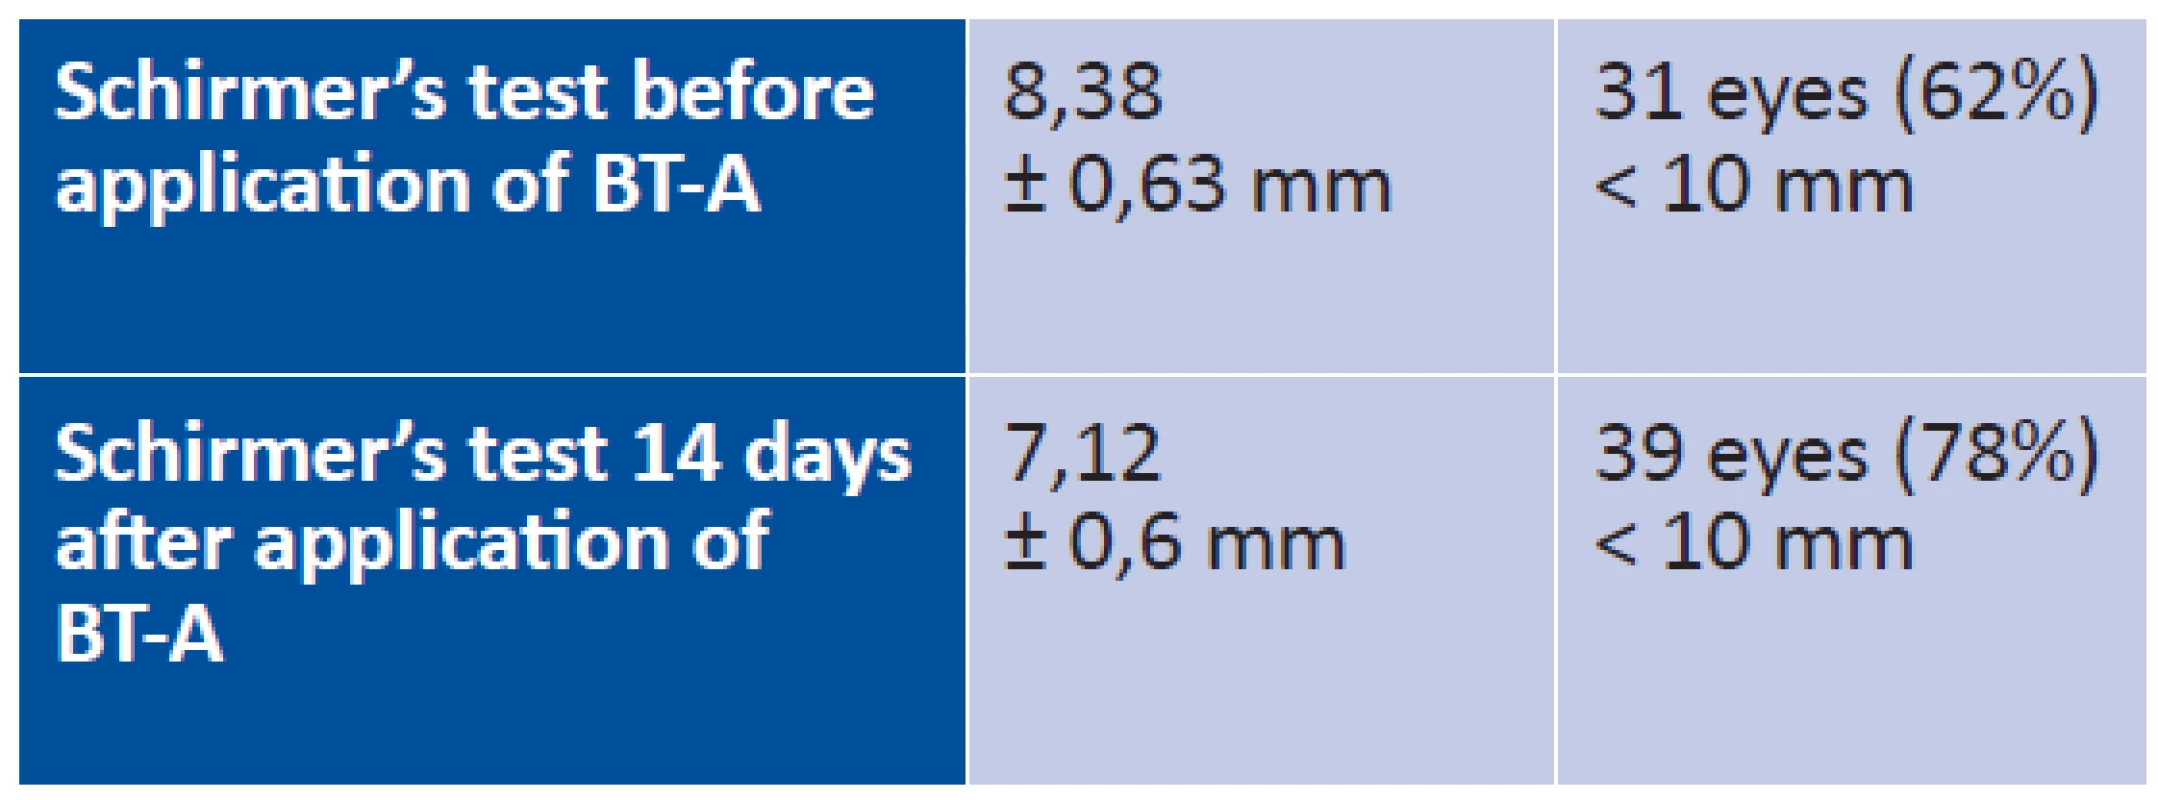 Results of Schirmer’s test before and after
application of BT-A (average value ± SEM)